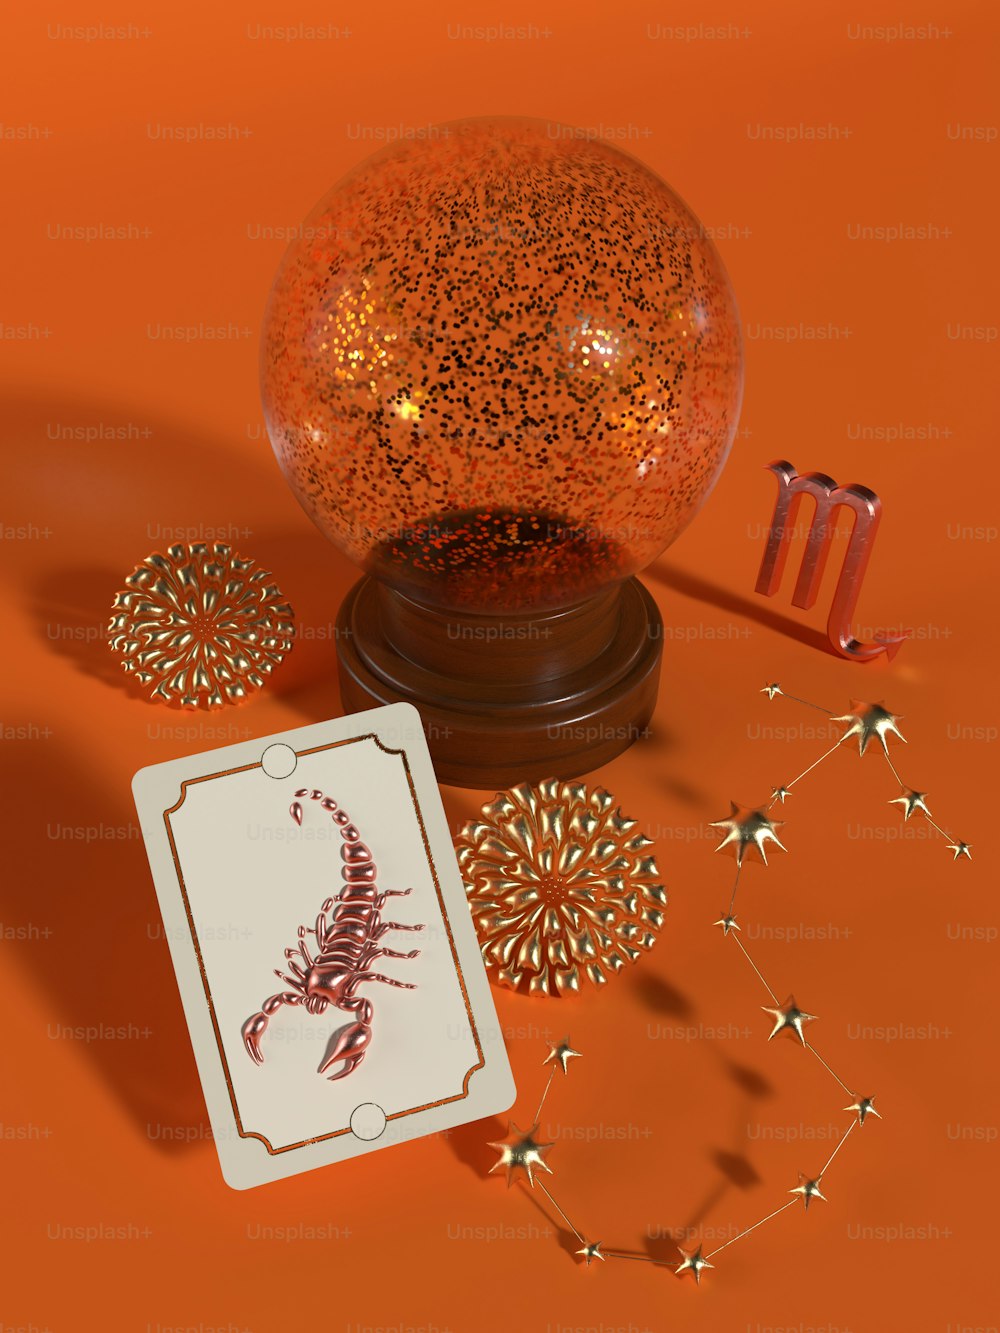 a card next to a glass ball with a scorpion on it